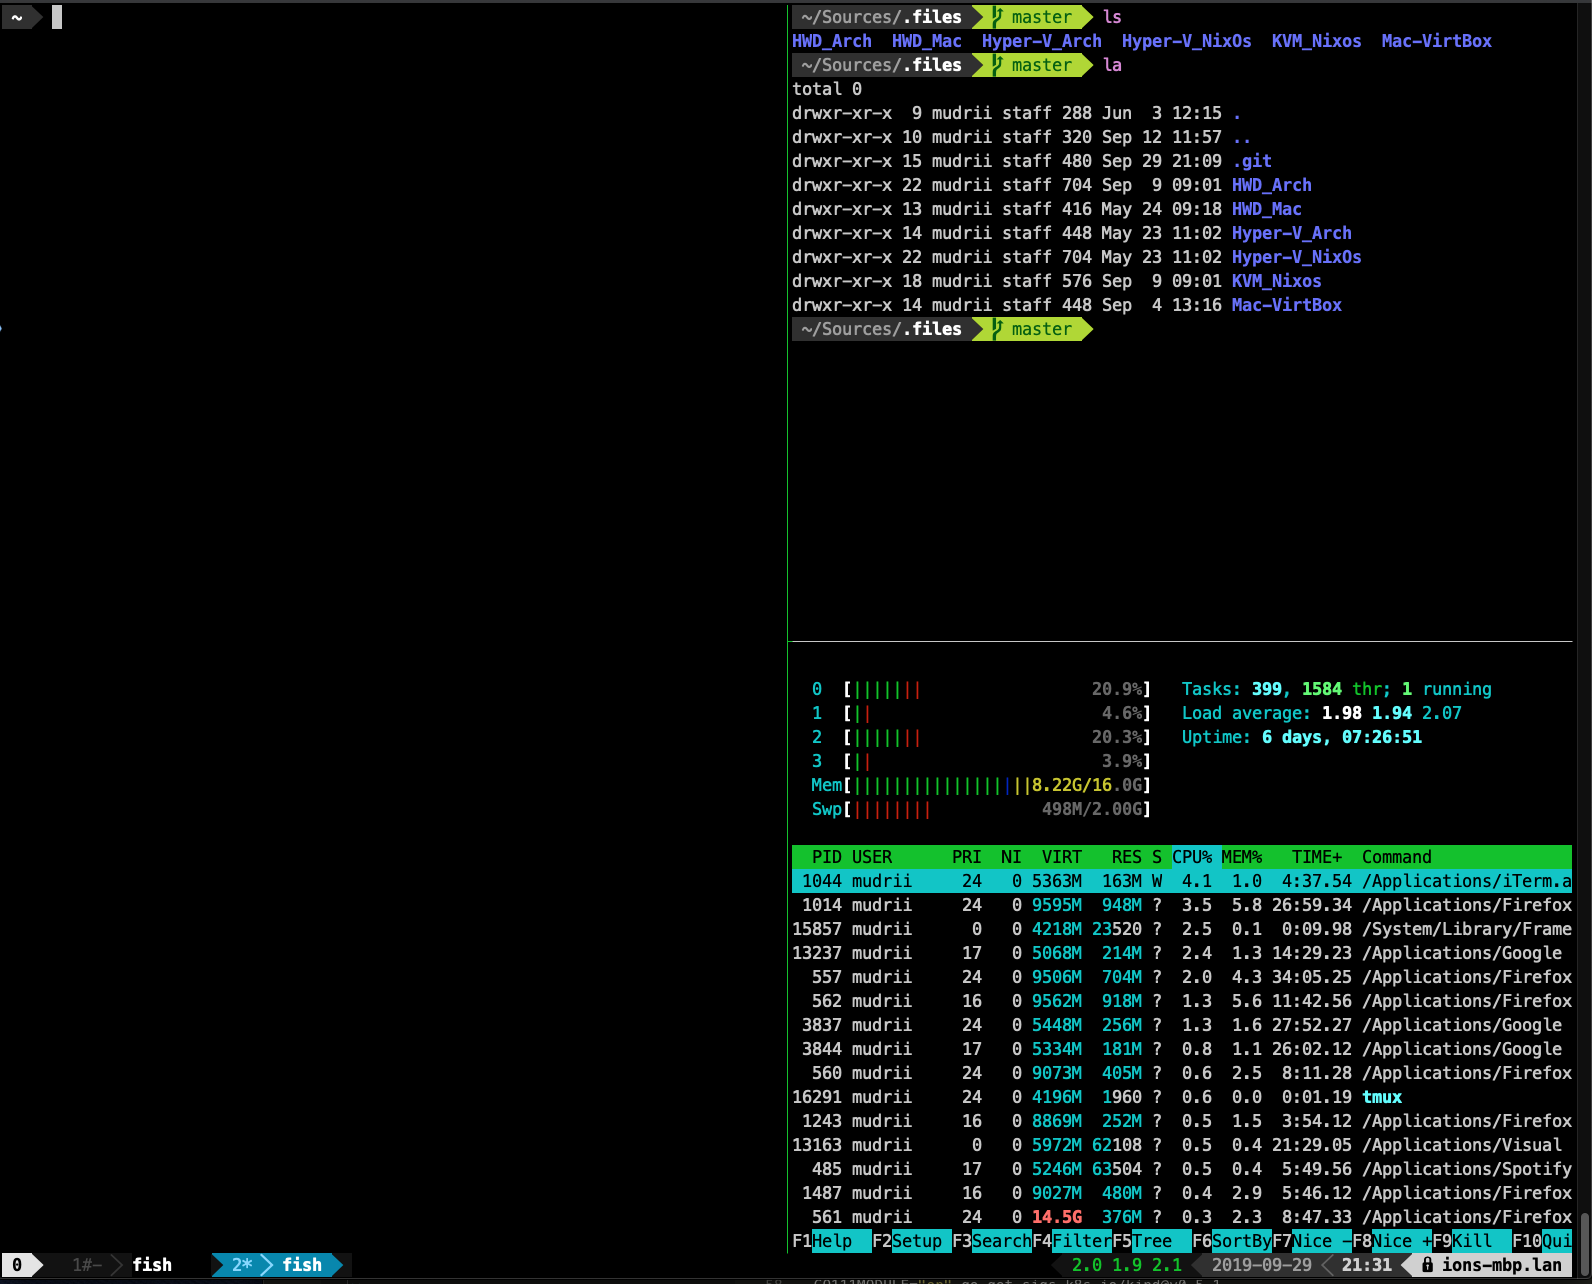 Improved terminal view/layout